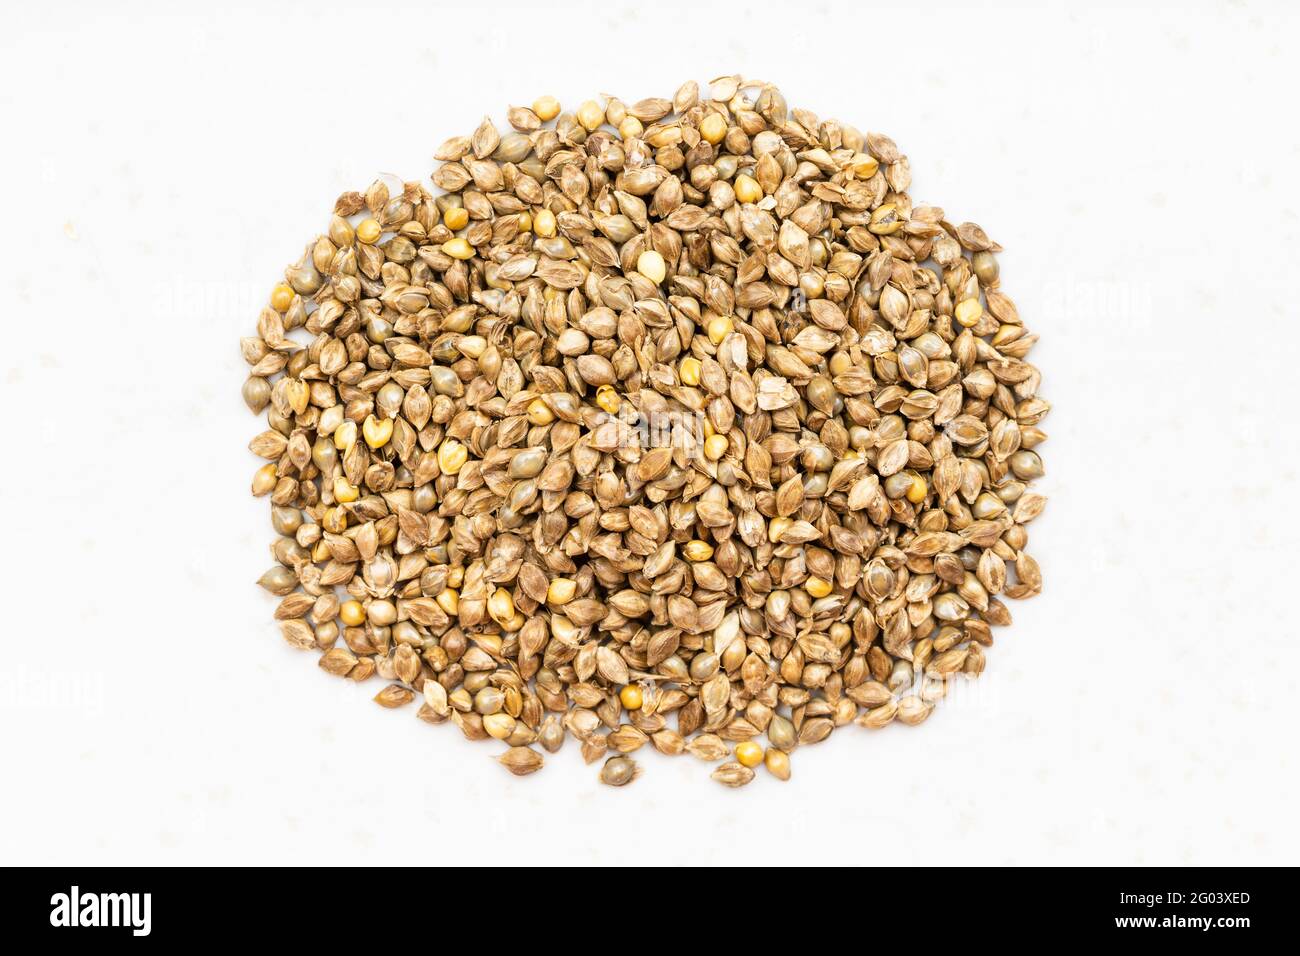 top view of pile of whole-grain barnyard millet seeds close up on gray ceramic plate Stock Photo